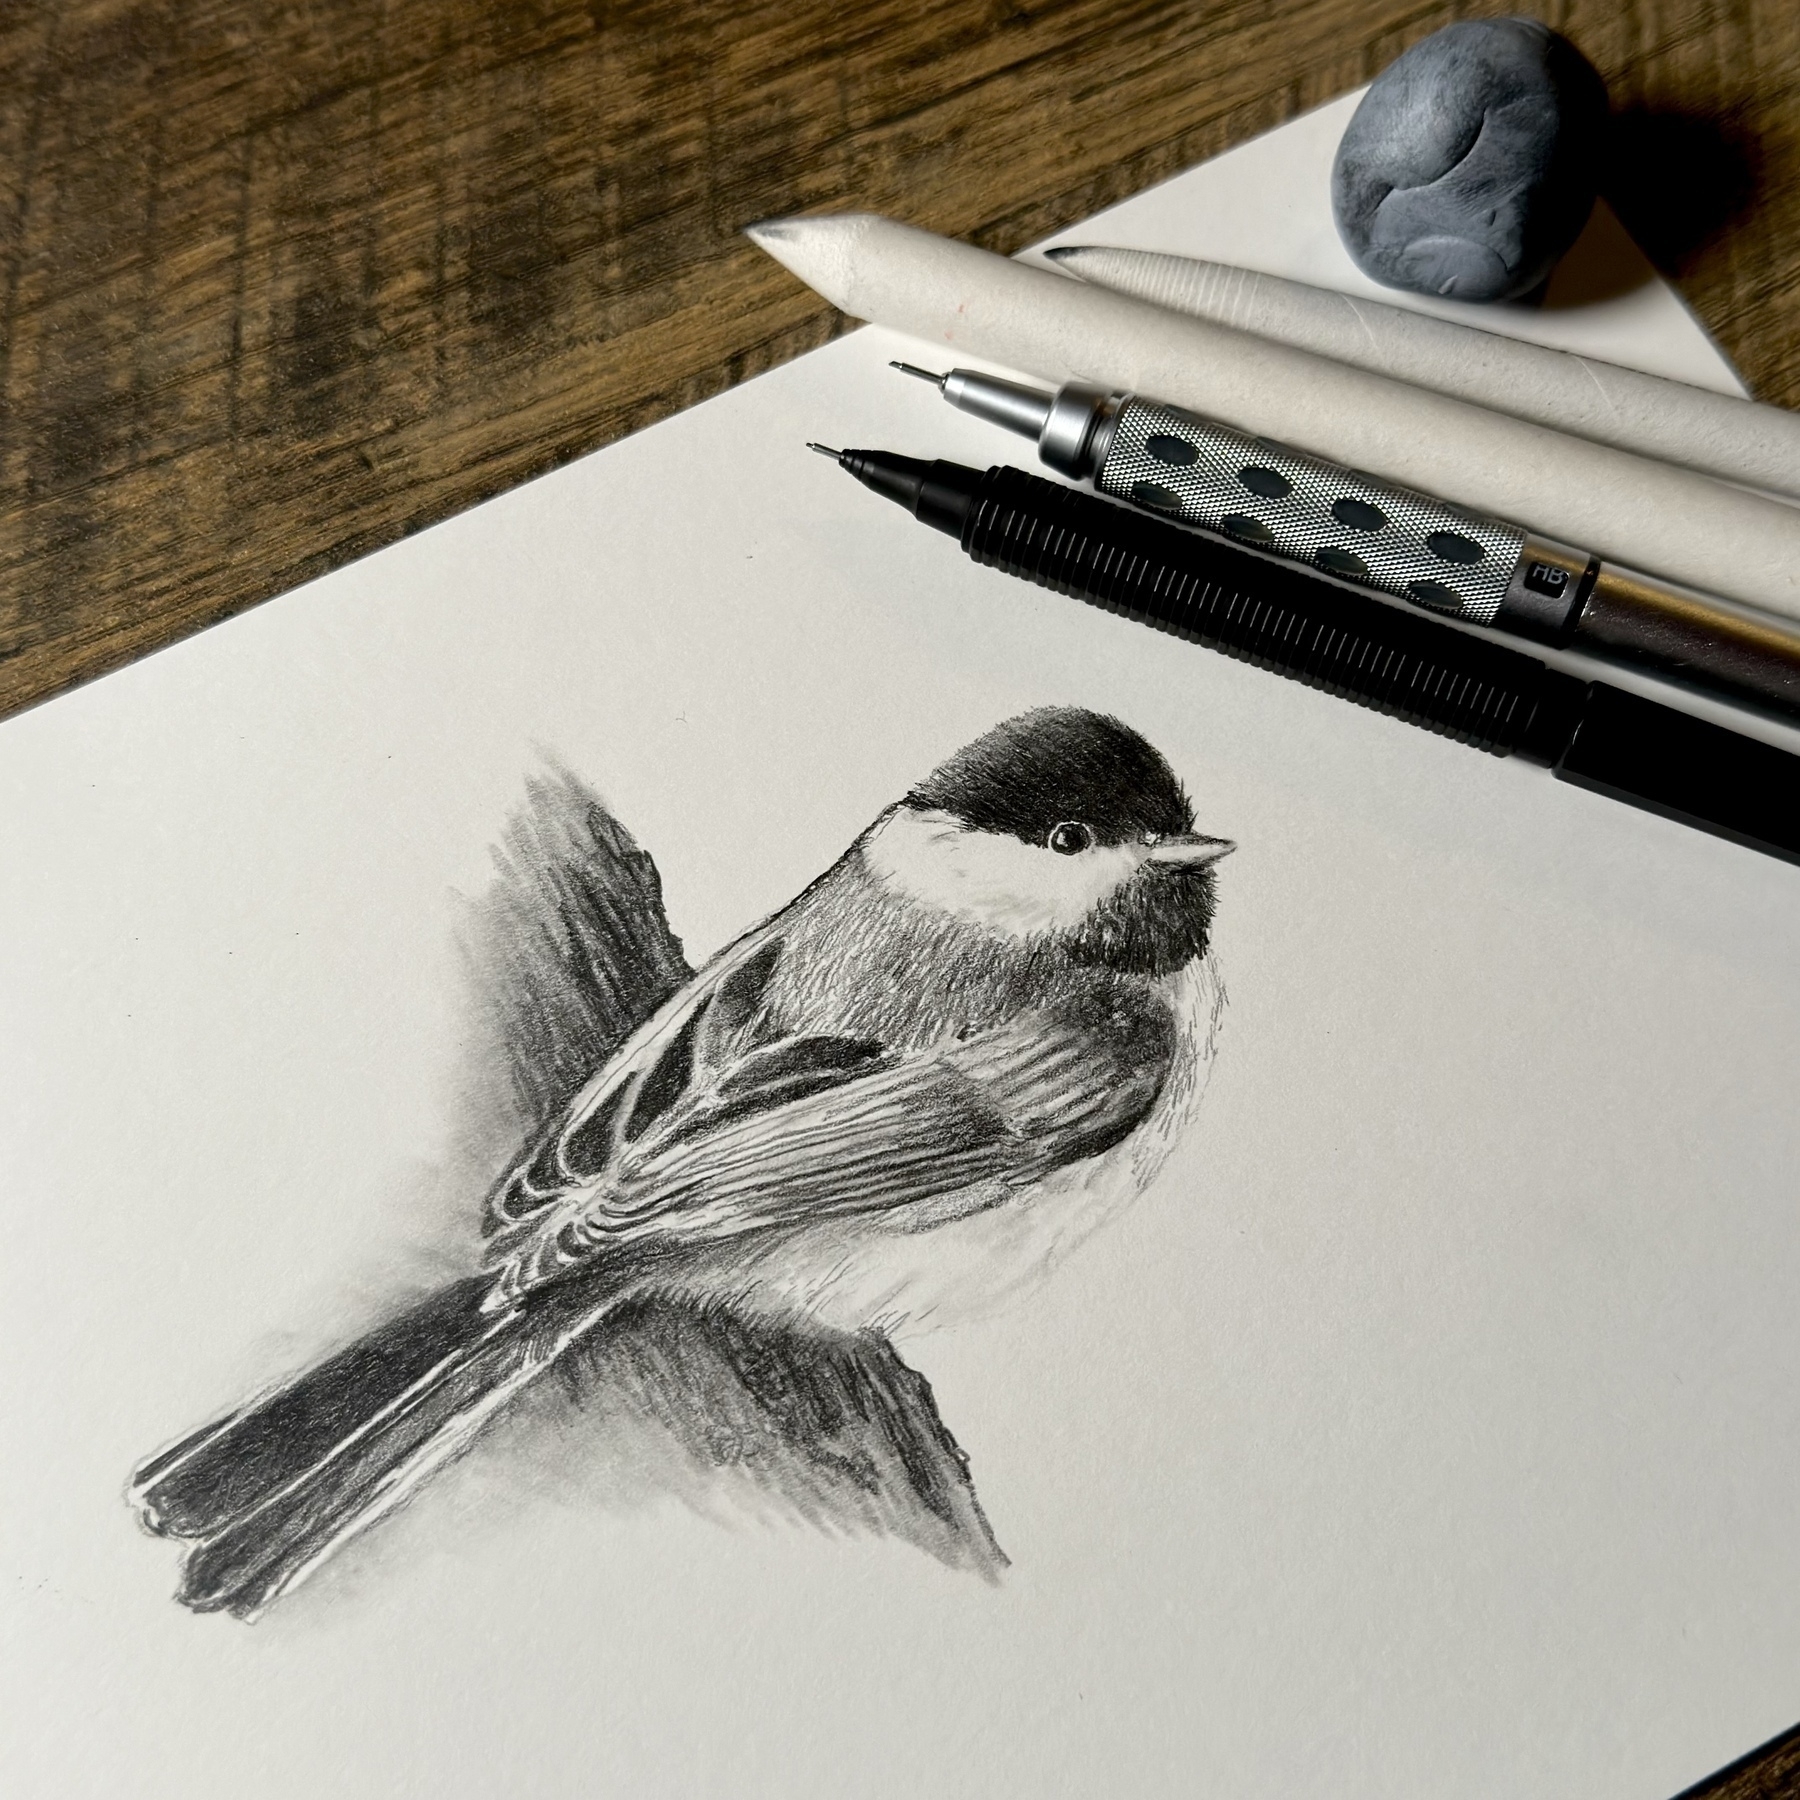 An intricate graphite pencil sketch of a black-capped chickadee positioned on the right, with its detailed feathers and distinct markings clearly visible. The sketch is on a white paper that lies on a wooden surface, surrounded by drawing tools which include a mechanical pencil, a blending stump, an eraser, and a kneaded eraser to the top left.